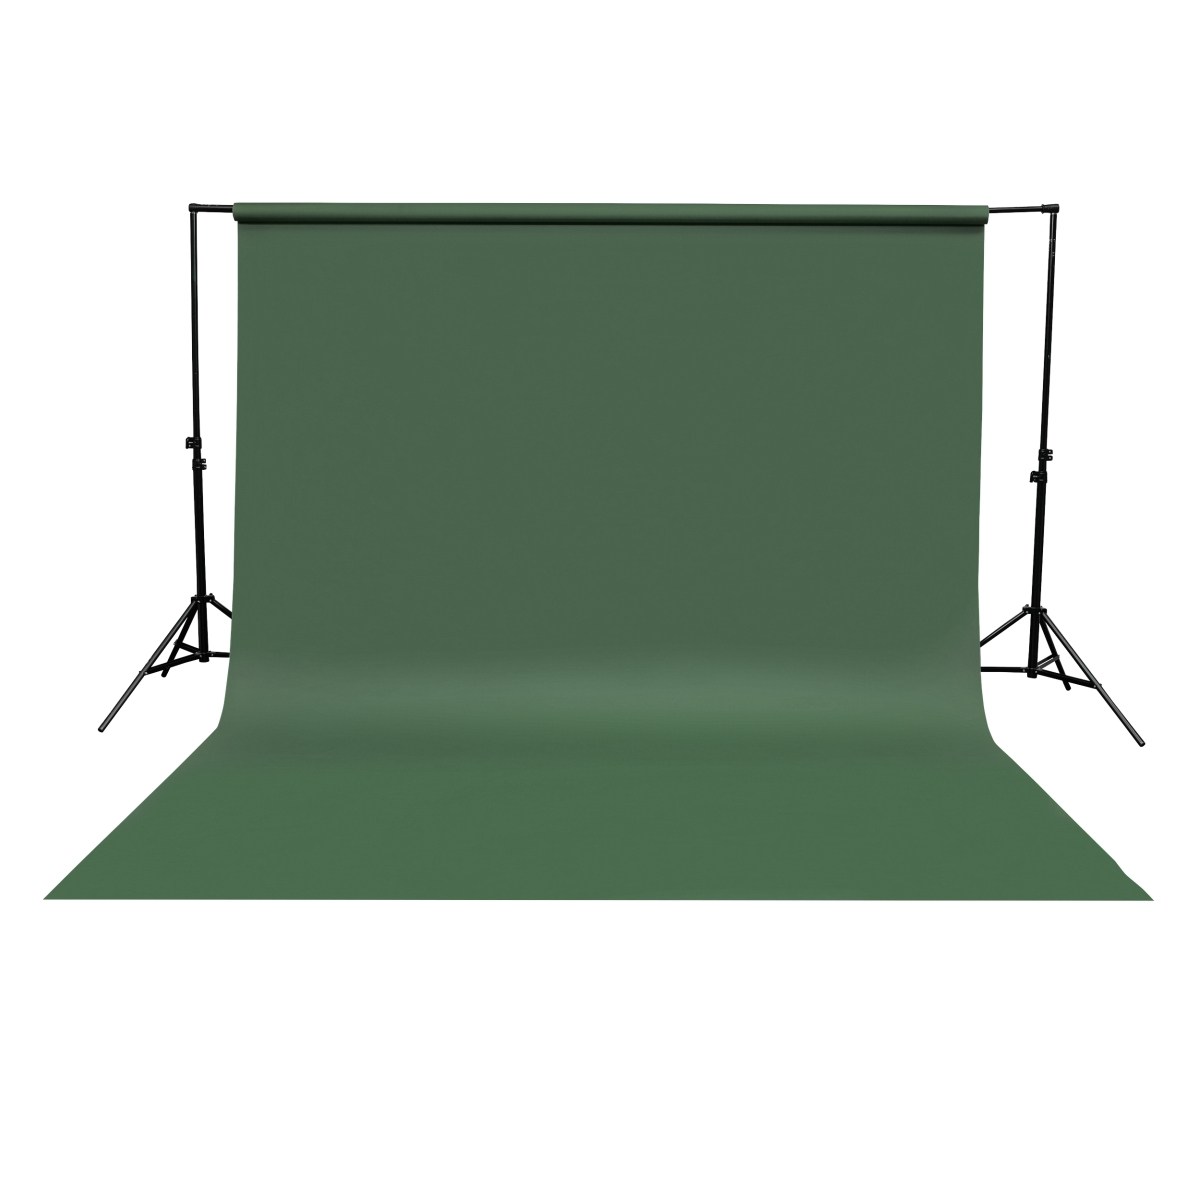 Walimex pro paper background 2,72x10m, green